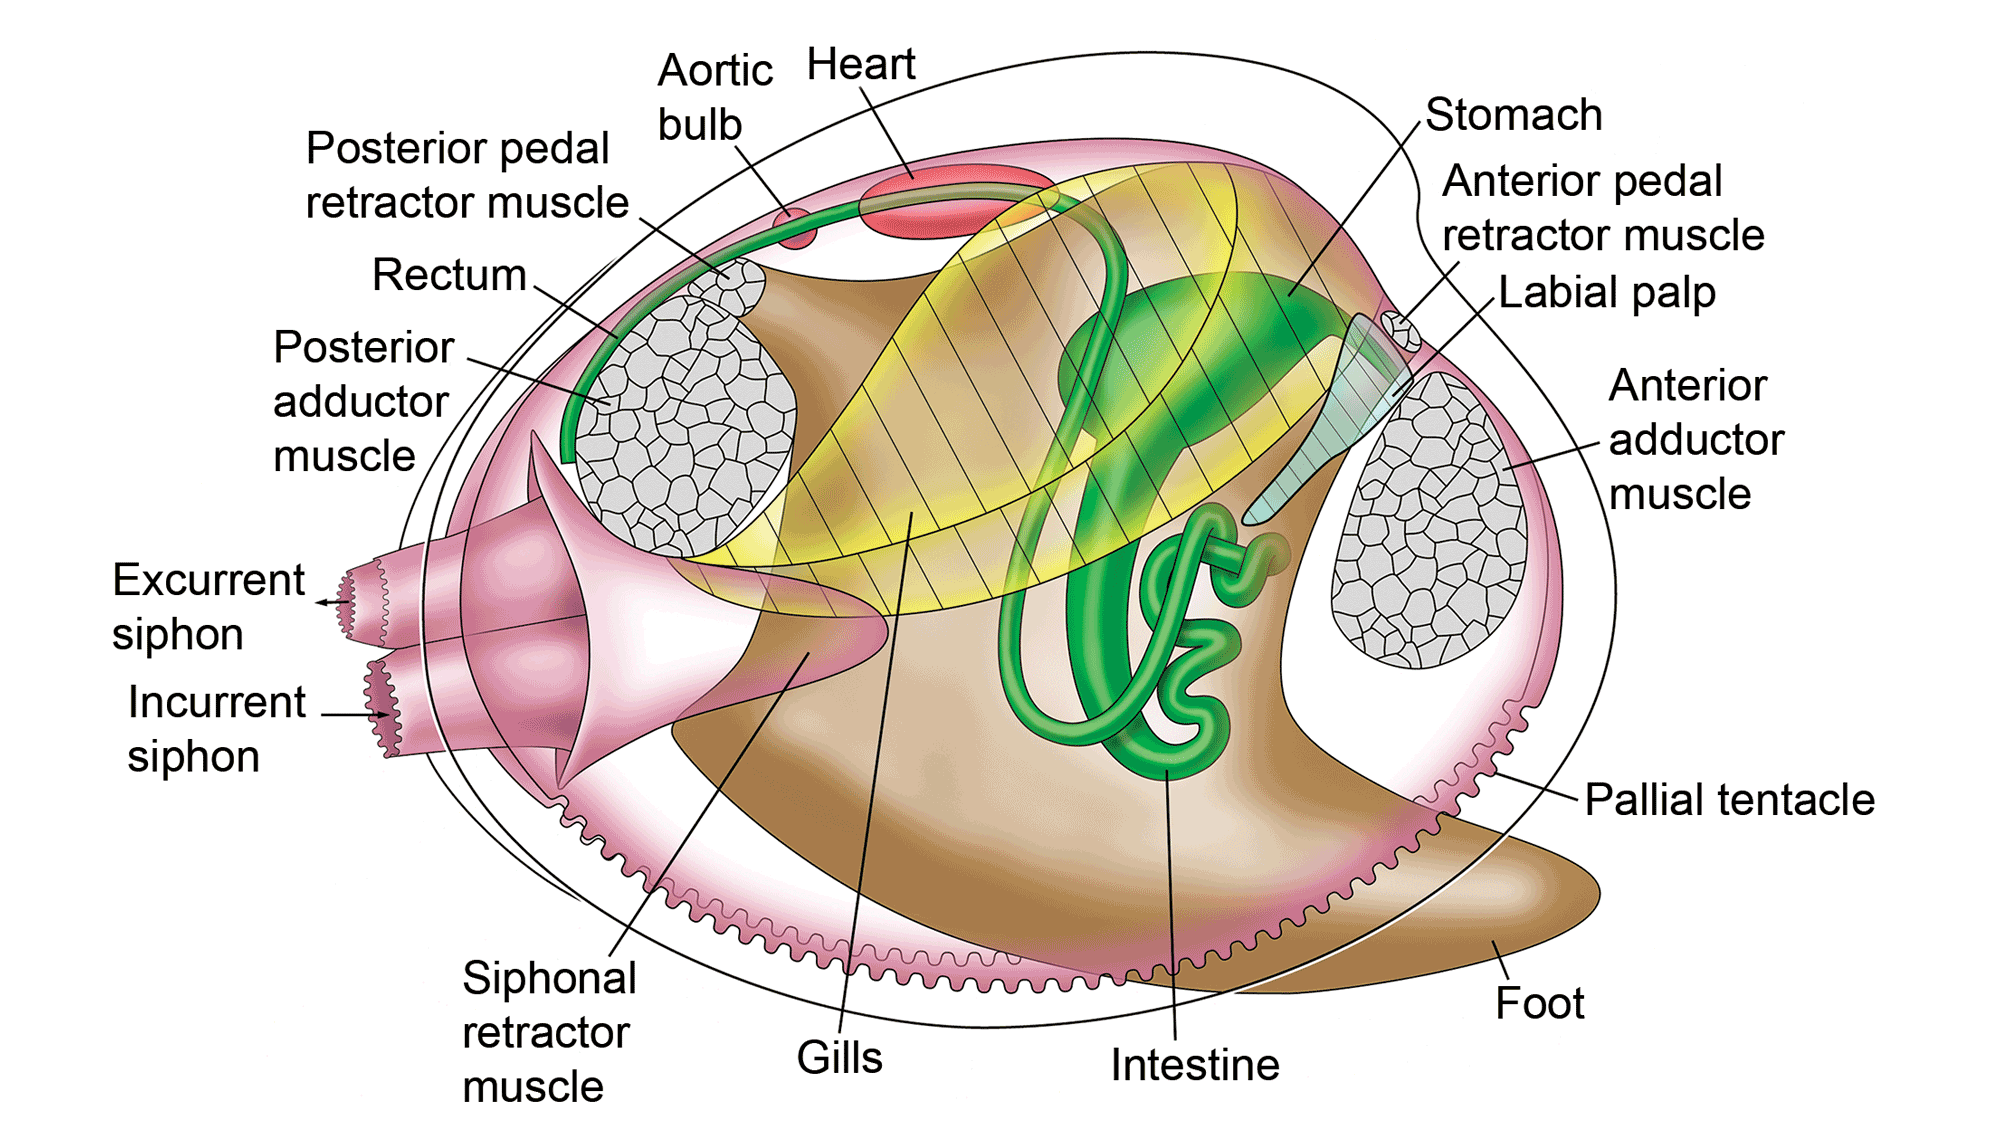 Illustration showing the internal anatomy of a bivalve, with the different parts labeled.